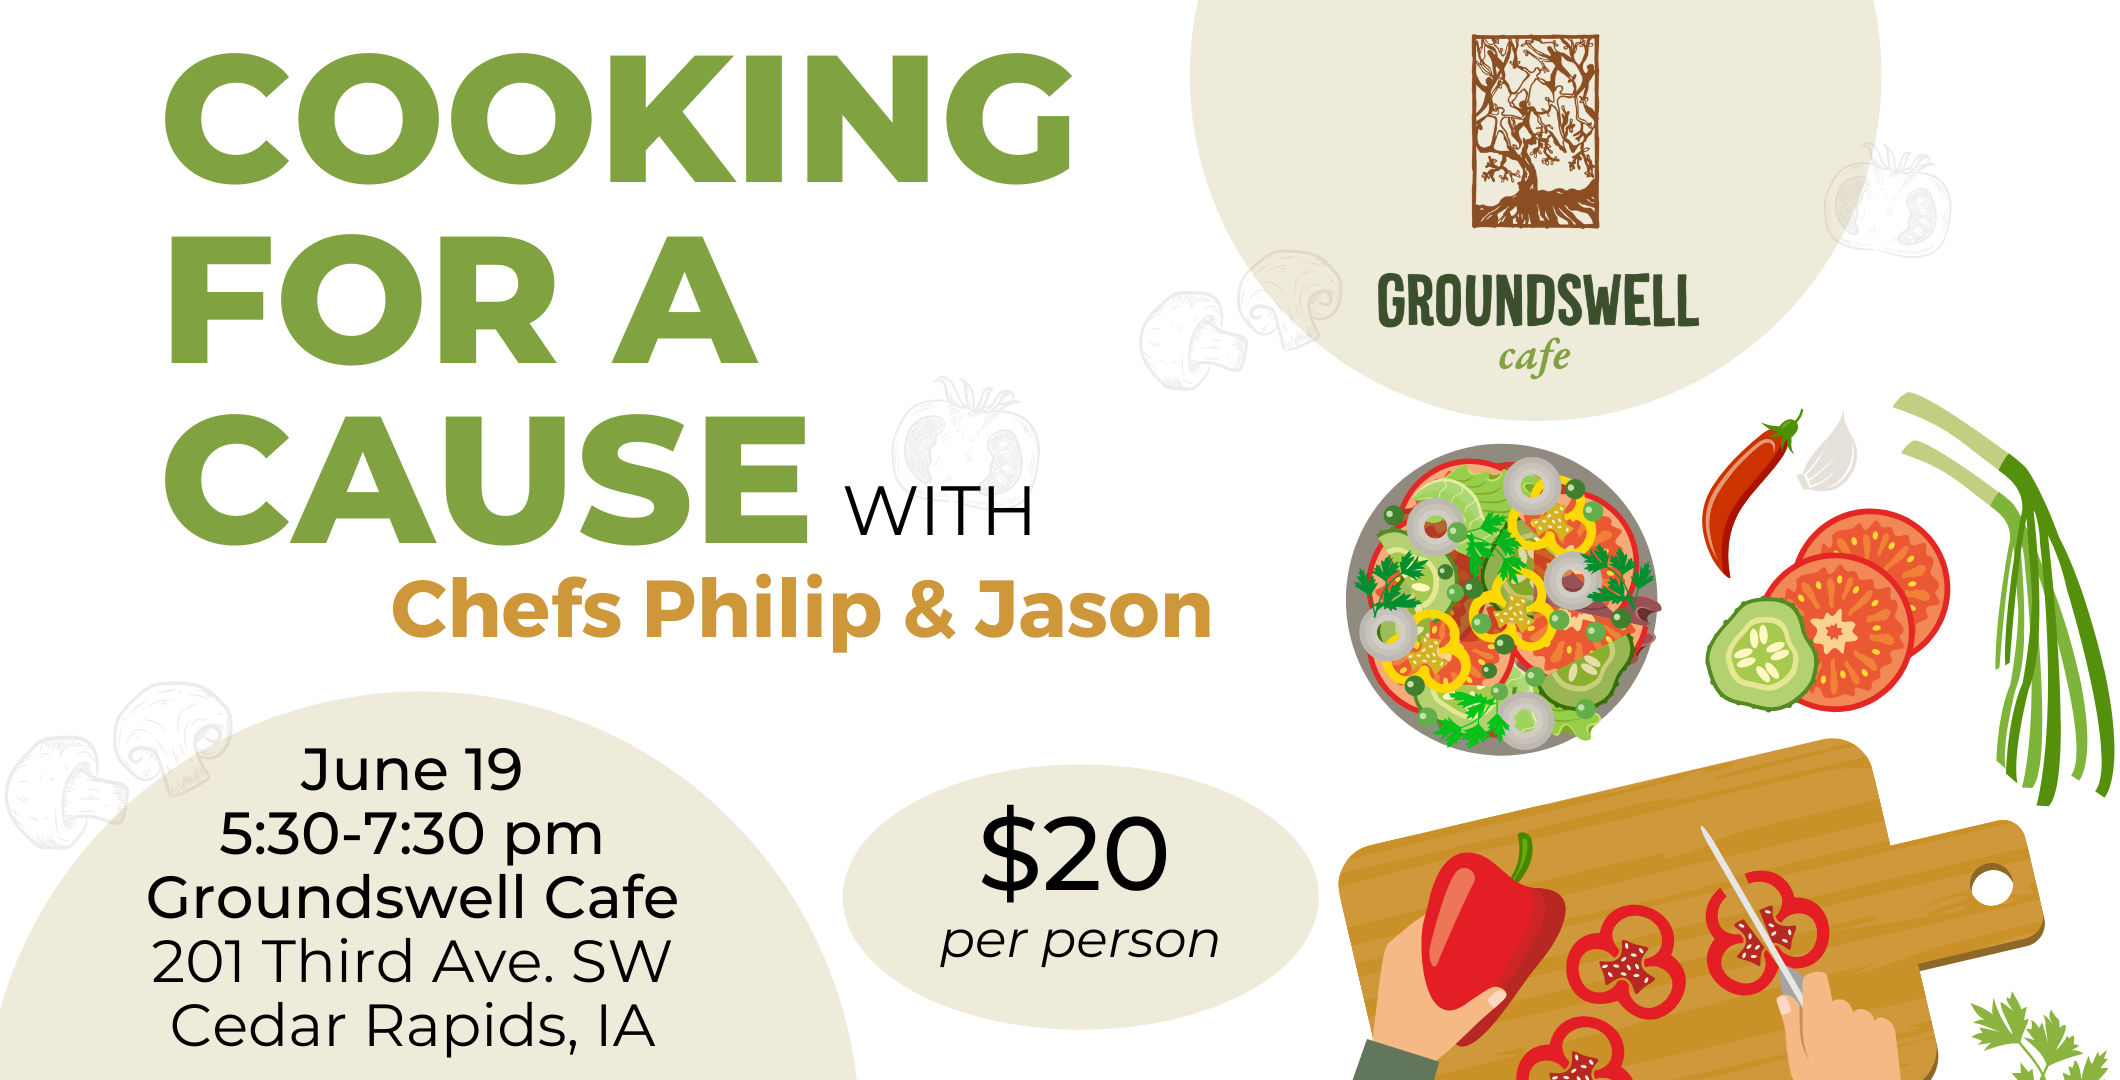 Cooking for a Cause – June 19